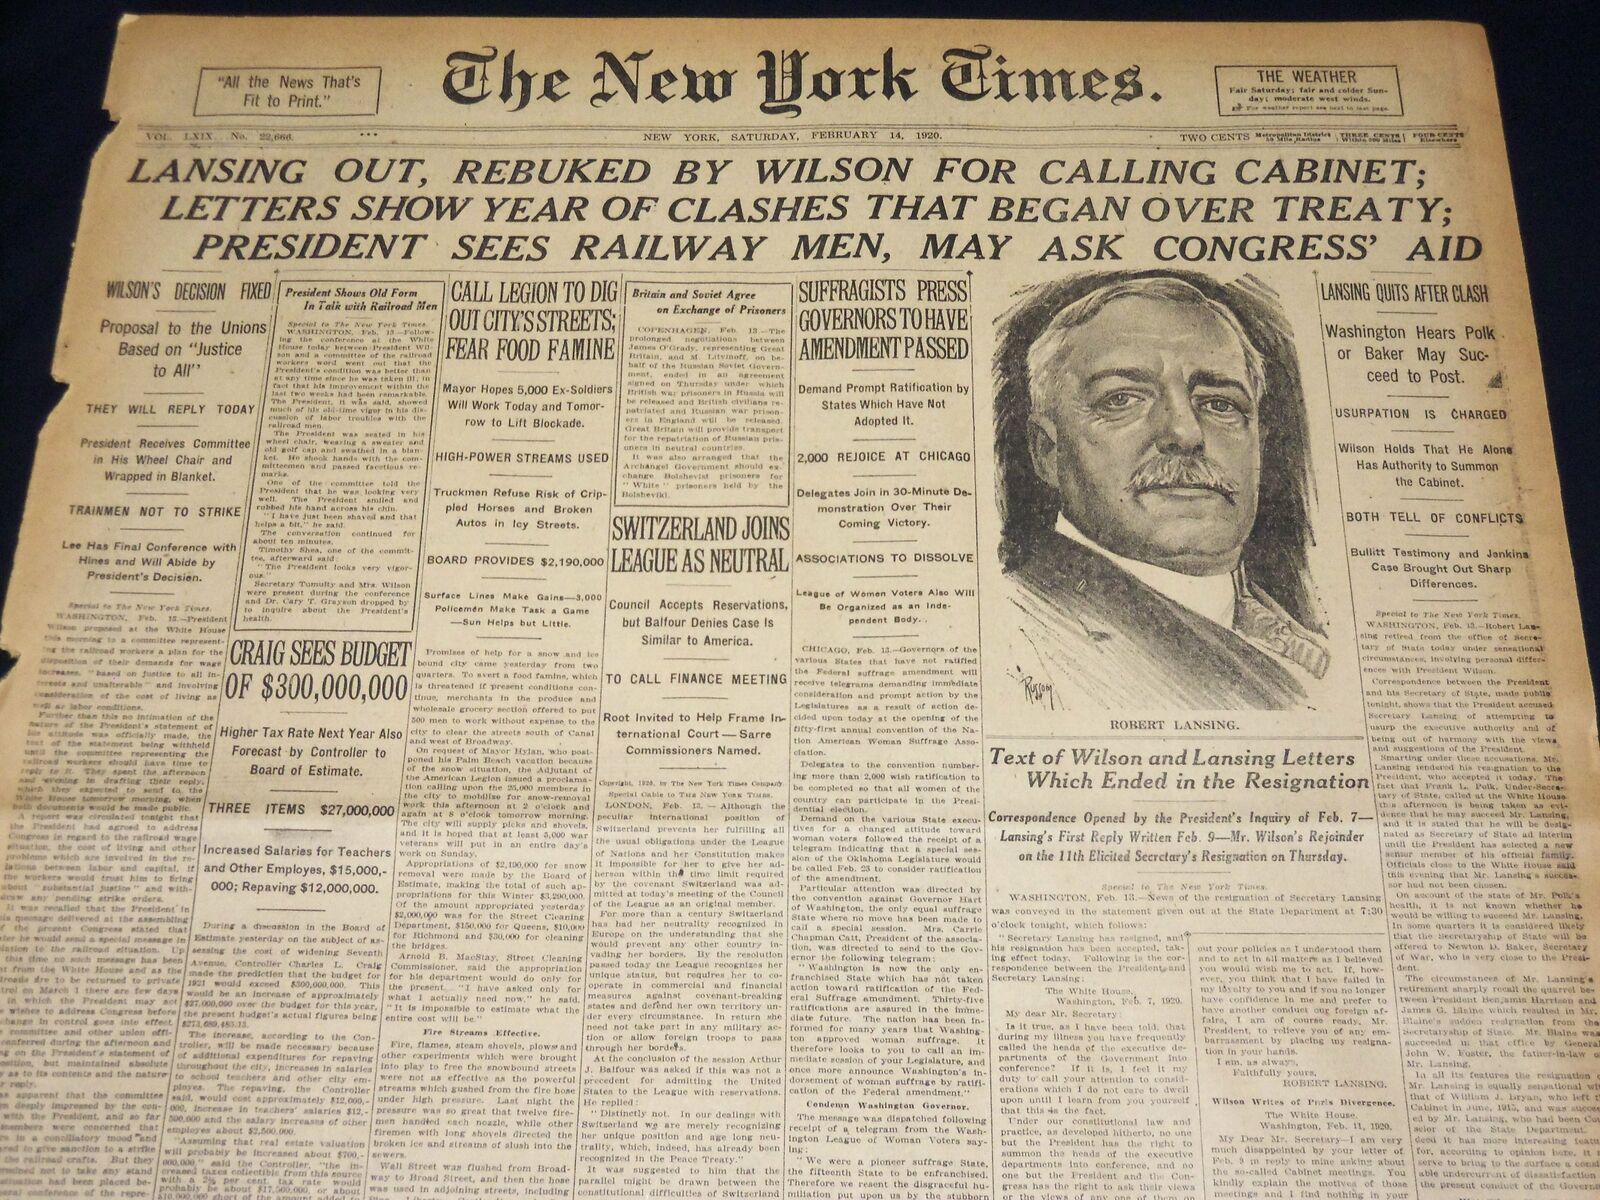 1920 FEBRUARY 14 NEW YORK TIMES - LANSING OUT REBUKED BY WILSON - NT 7870